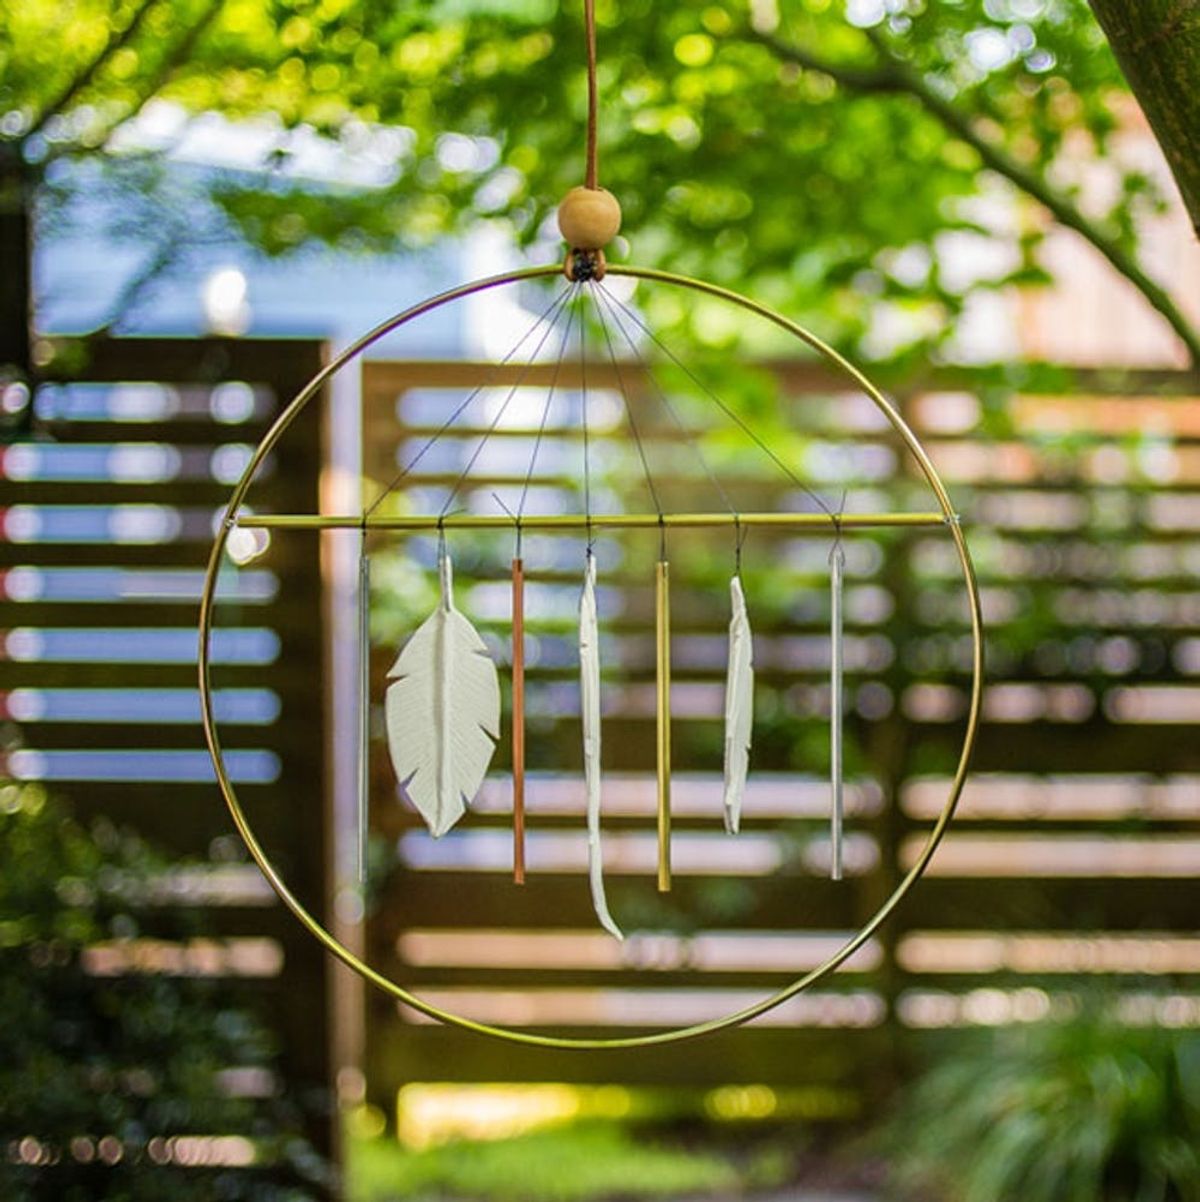 Your Friends Will Never Believe You Made This Gorg Wind Chime for $20